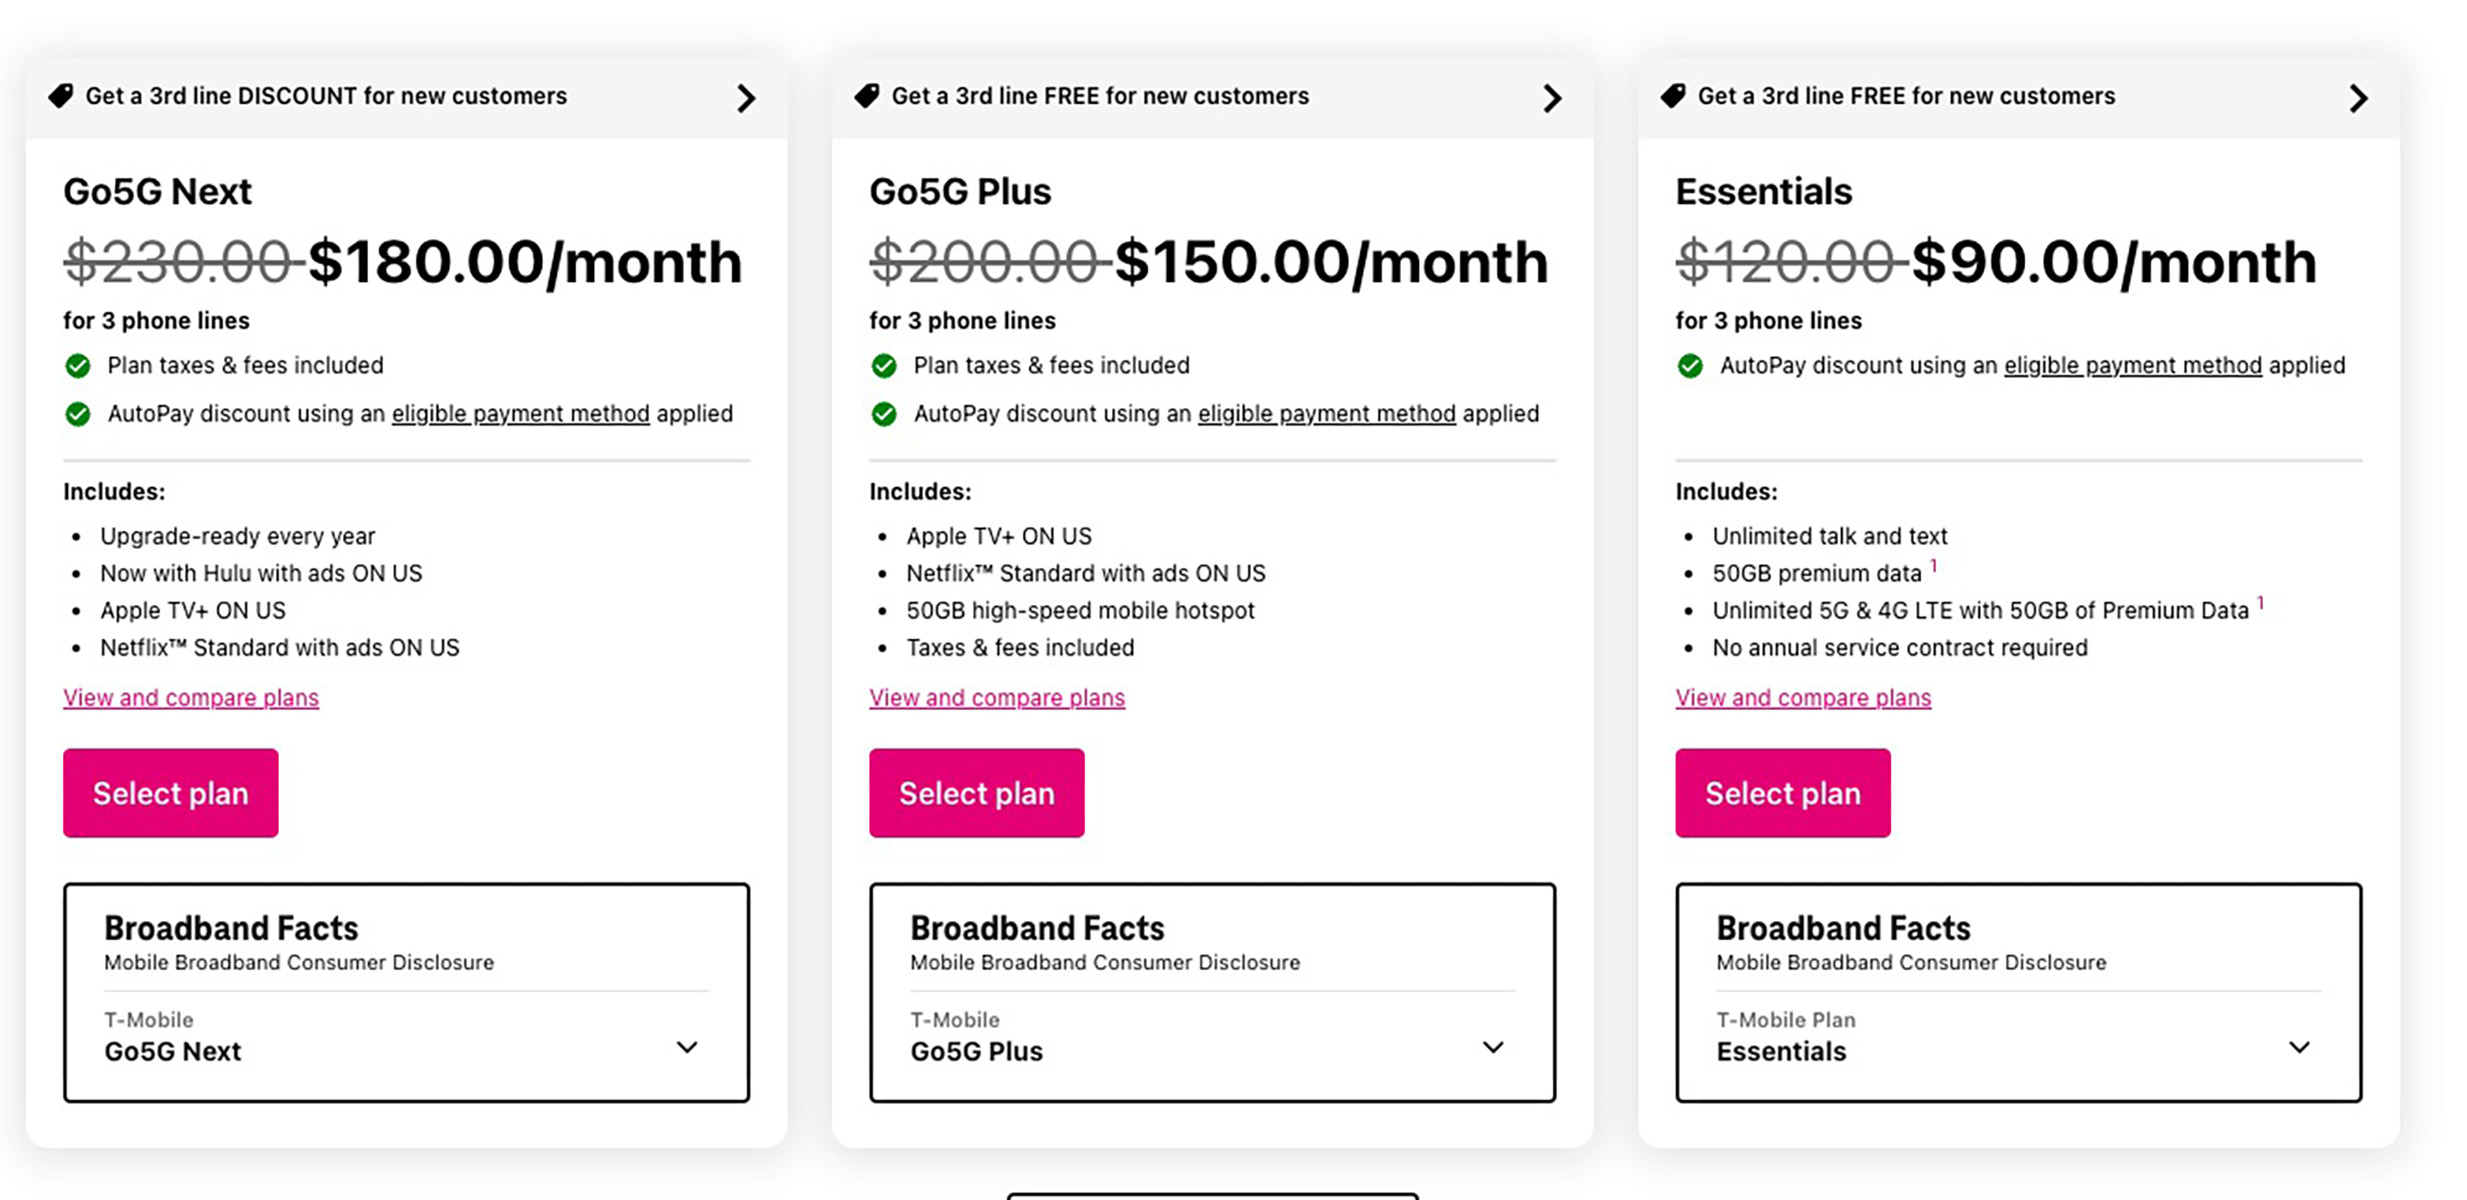 T-Mobile Broadband Facts Page